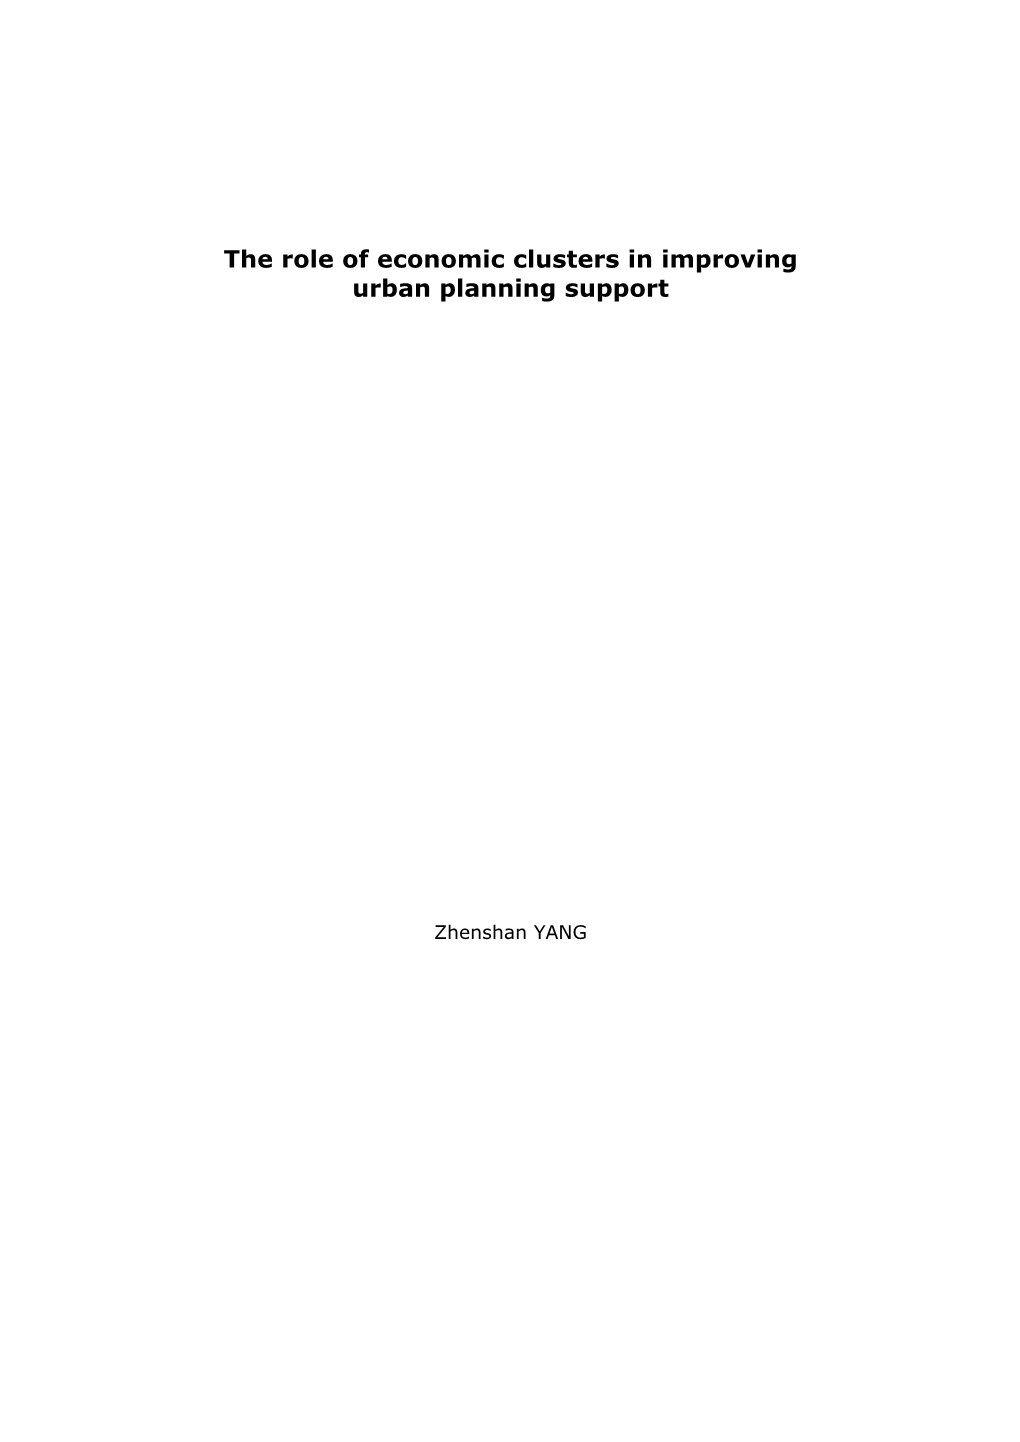 The Role of Economic Clusters in Improving Urban Planning Support